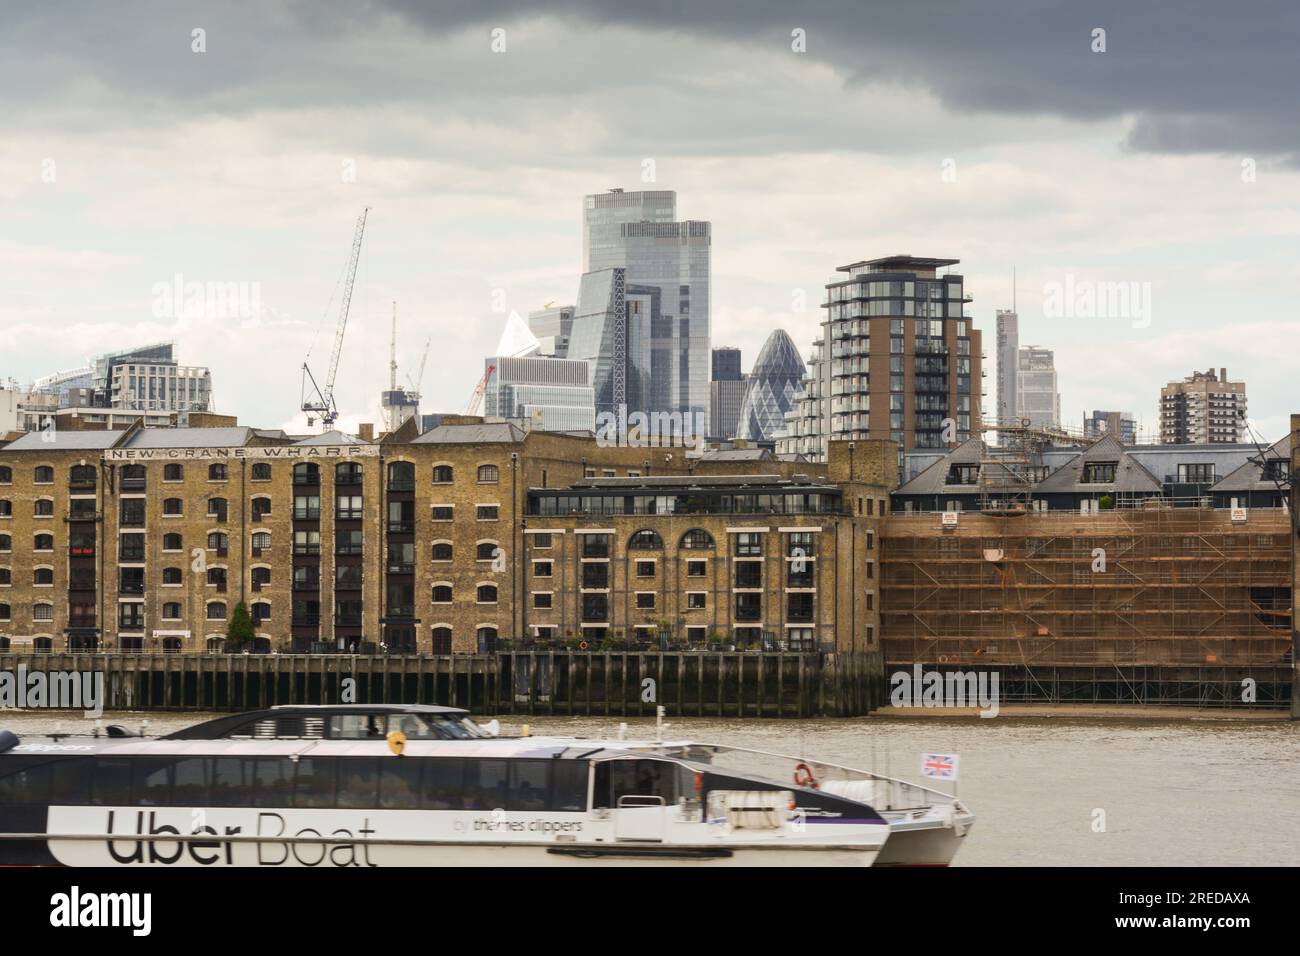 An Uber Boat travelling downstream on the River Thames at Wapping, London, E1, England, U.K. Stock Photo